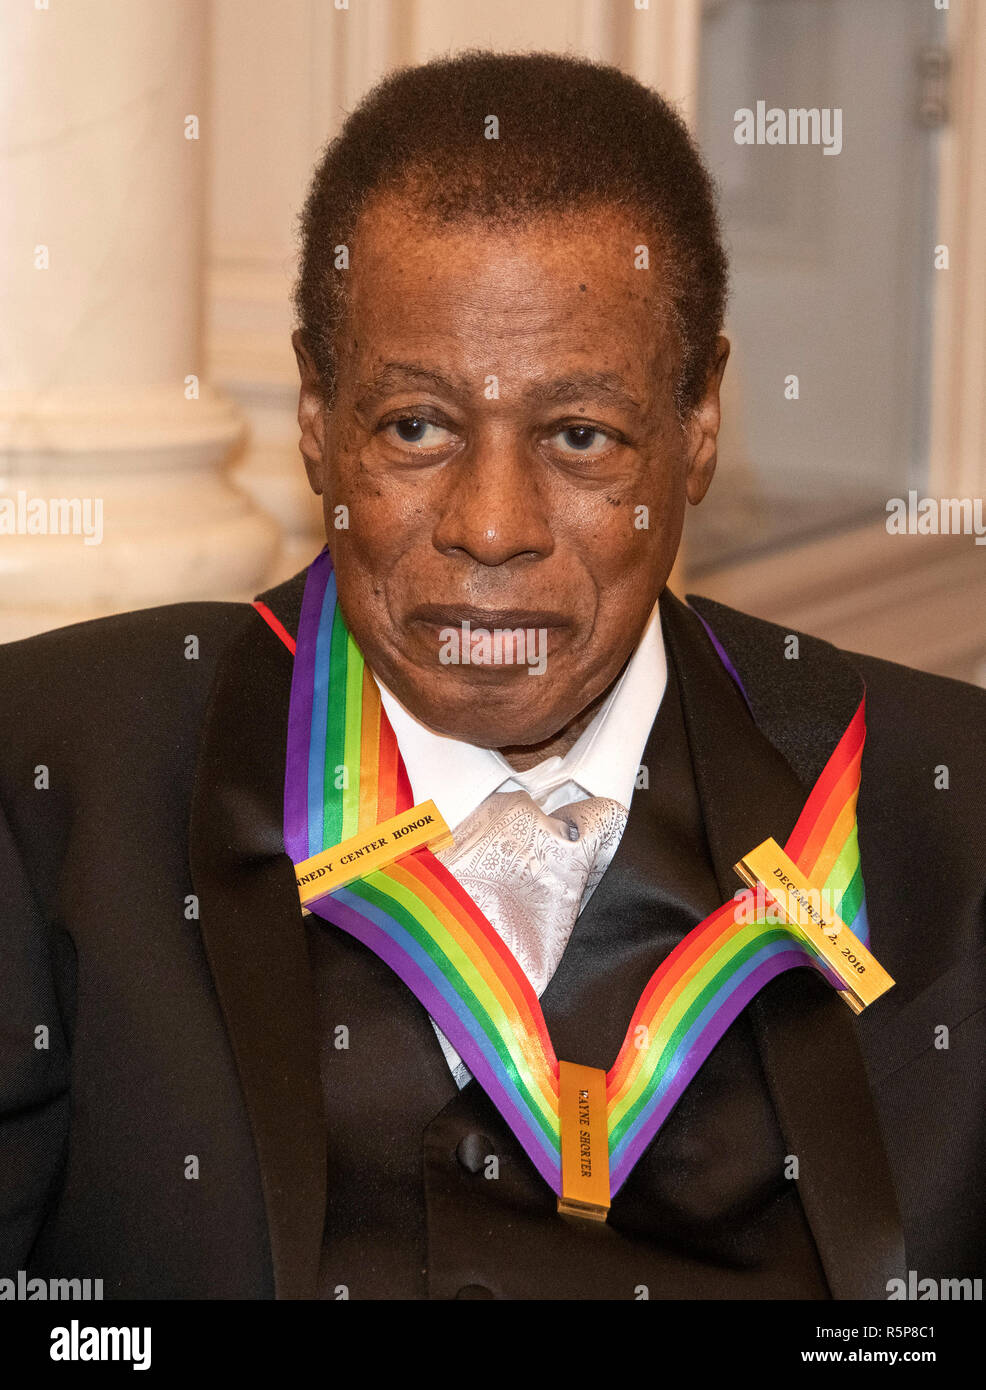 Wayne Shorter, one of the recipients of the 41st Annual Kennedy Center Honors, as he poses for a group photo following a dinner hosted by United States Deputy Secretary of State John J. Sullivan in their honor at the US Department of State in Washington, DC on Saturday, December 1, 2018. The 2018 honorees are: singer and actress Cher; composer and pianist Philip Glass; Country music entertainer Reba McEntire; and jazz saxophonist and composer Wayne Shorter. This year, the co-creators of Hamilton, writer and actor Lin-Manuel Miranda; director Thomas Kail; choreographer Andy Blankenbuehler; an Stock Photo